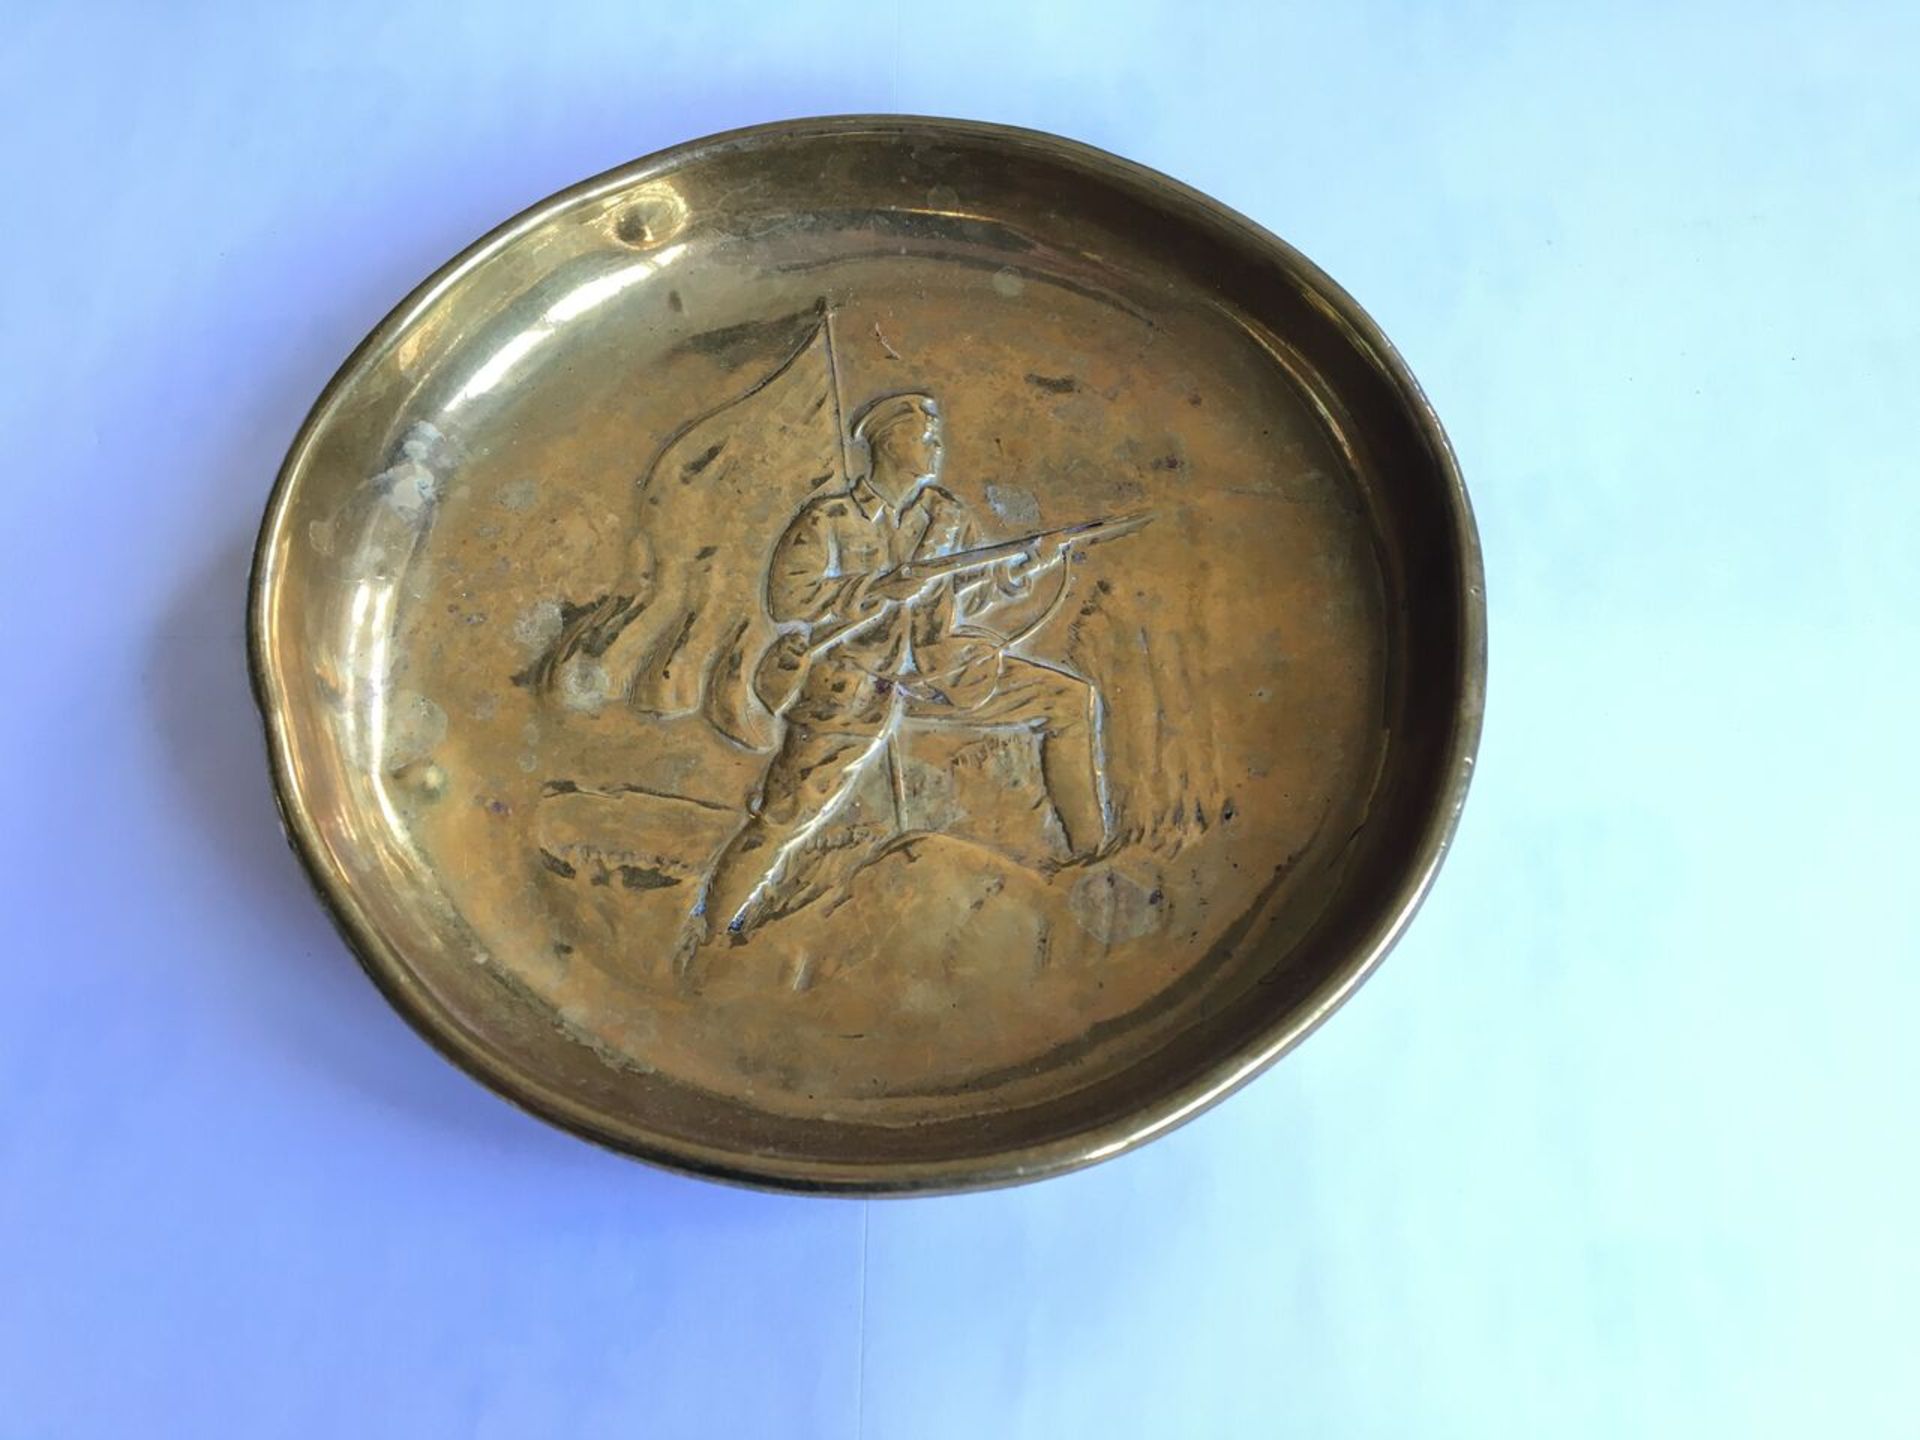 WWI BRASS BOWL DEPICTING SOLDIER. APPROX DIAMETER 12CM. FREE UK DELIVERY. NO VAT.